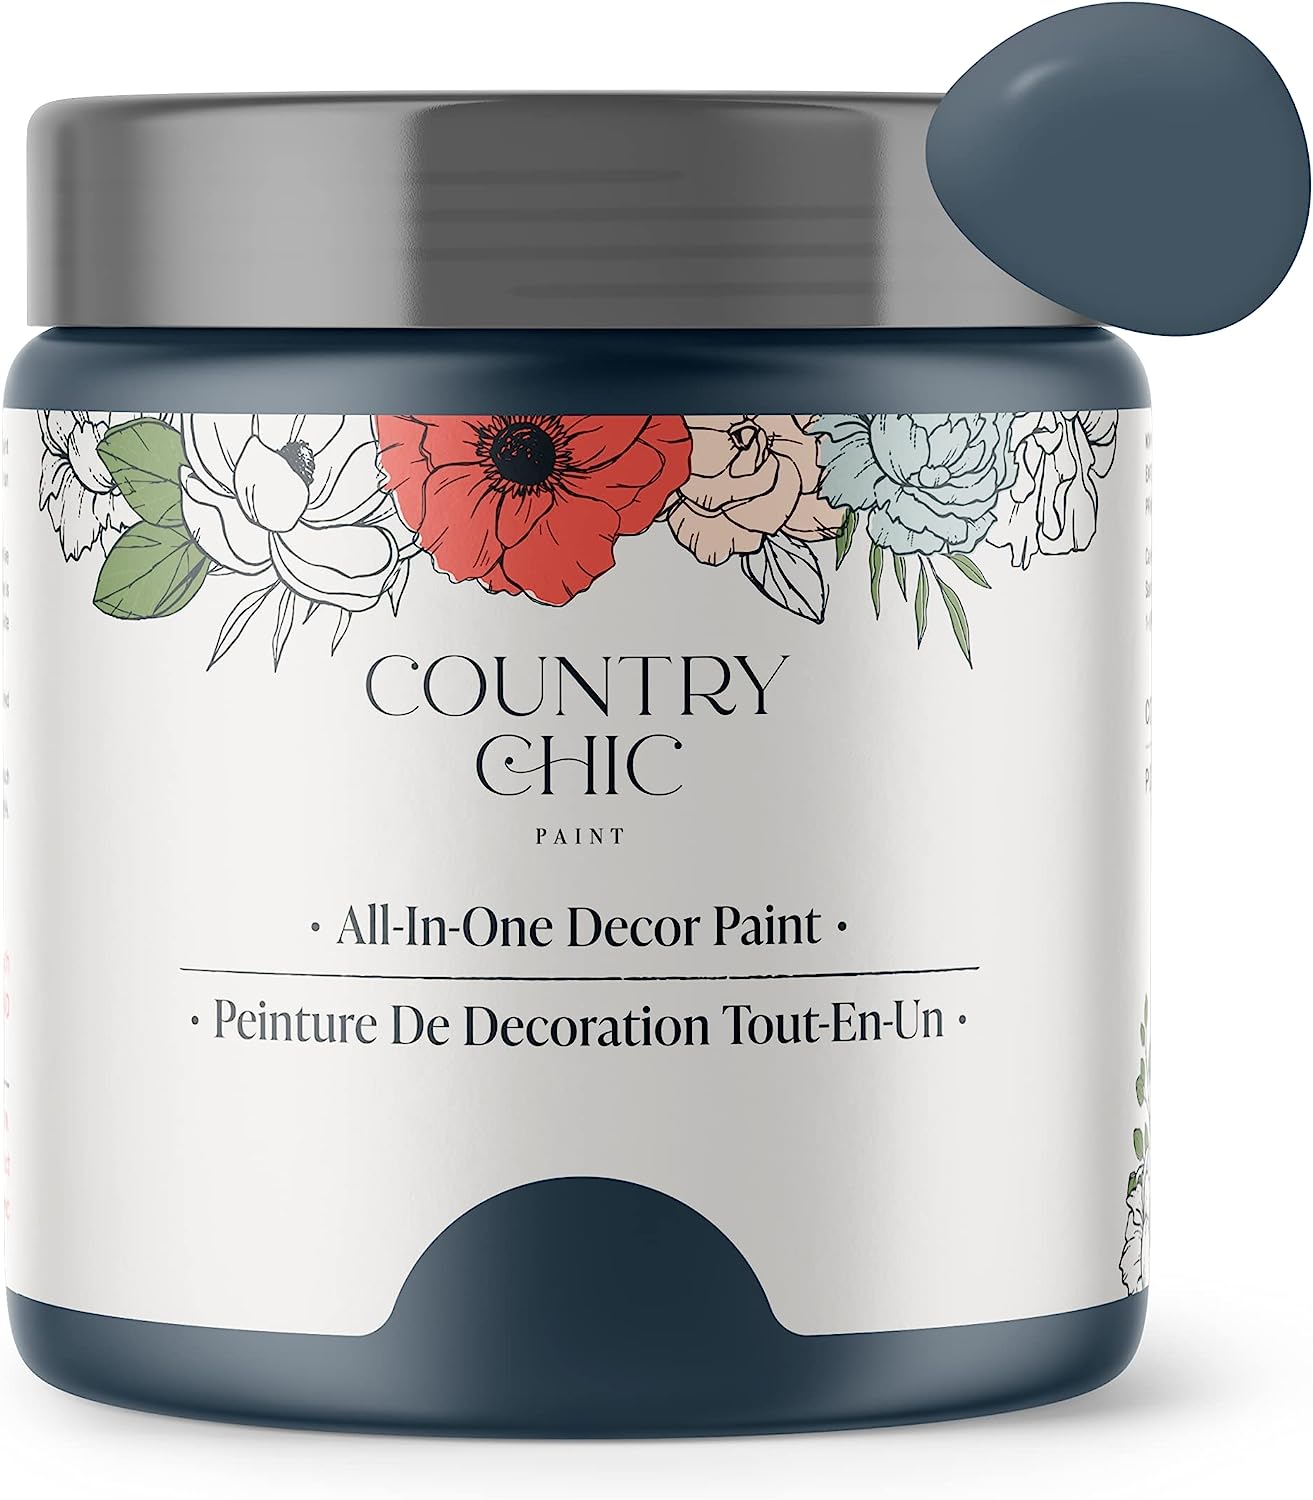 Chalk Style Paint - For Furniture, Home Decor, Crafts [...]